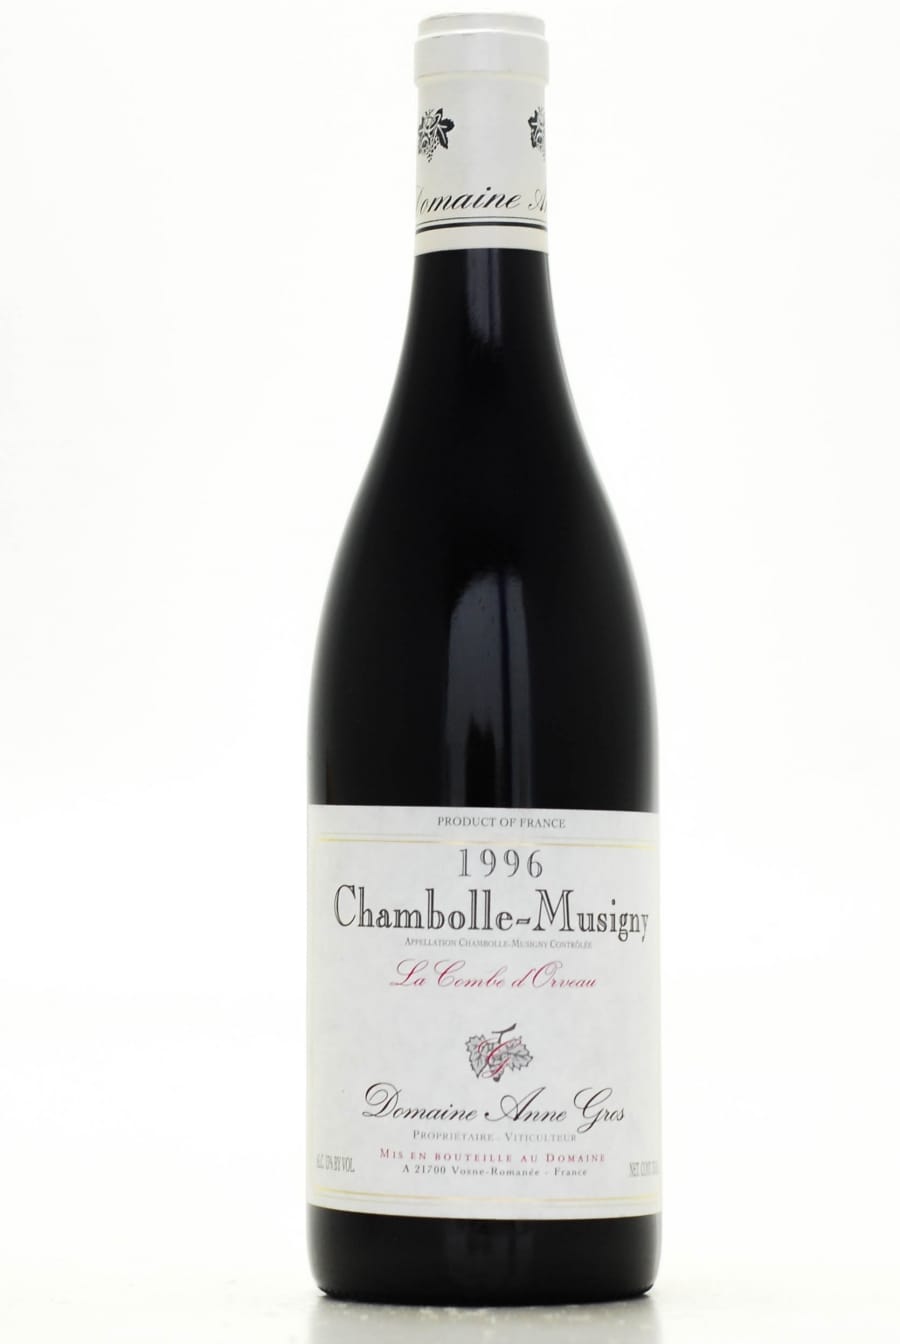 Anne Gros - Chambolle Musigny La Combe D'Orveau 1996